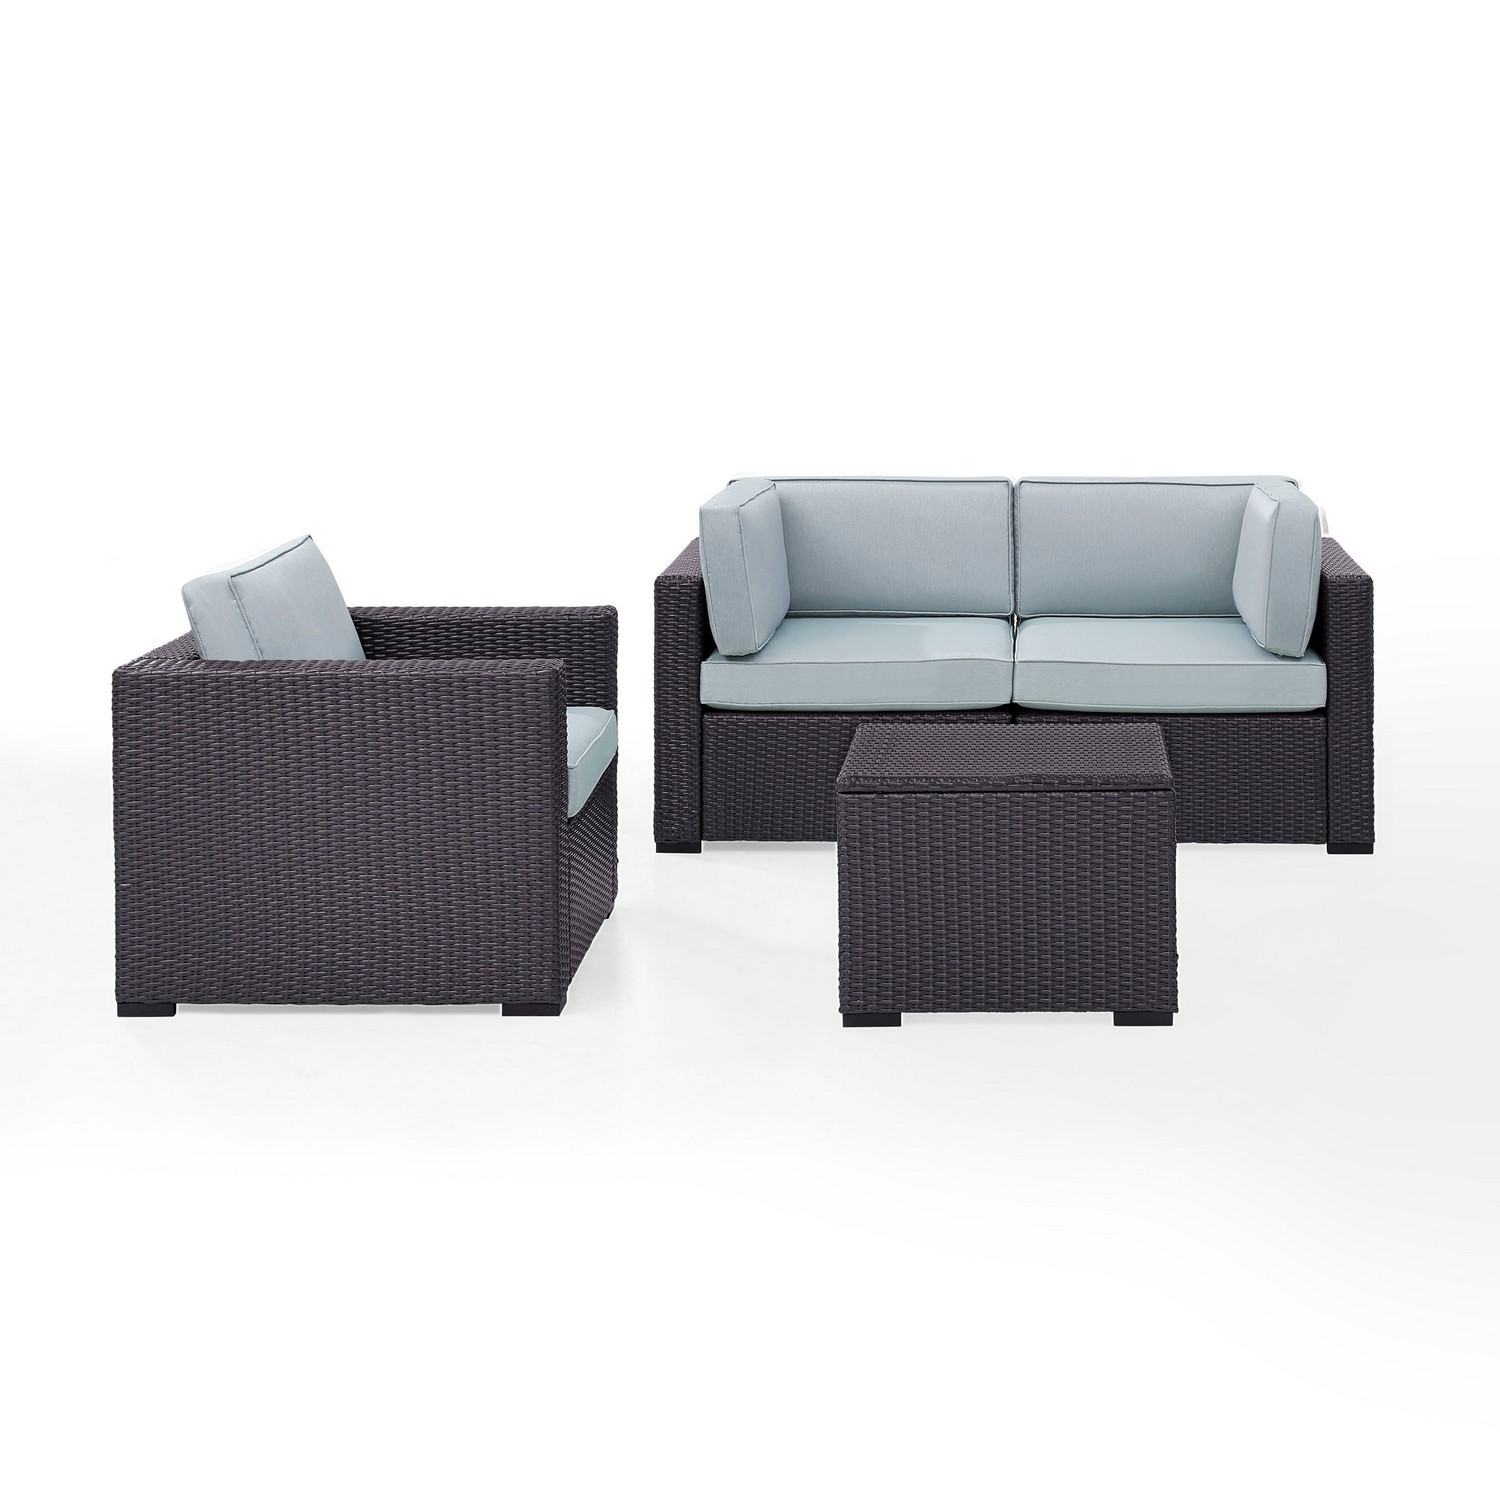 Crosley Biscayne 4-PC Outdoor Wicker Sectional Set - 2 Corner Chairs, Arm Chair, Coffee Table - Mist/Brown